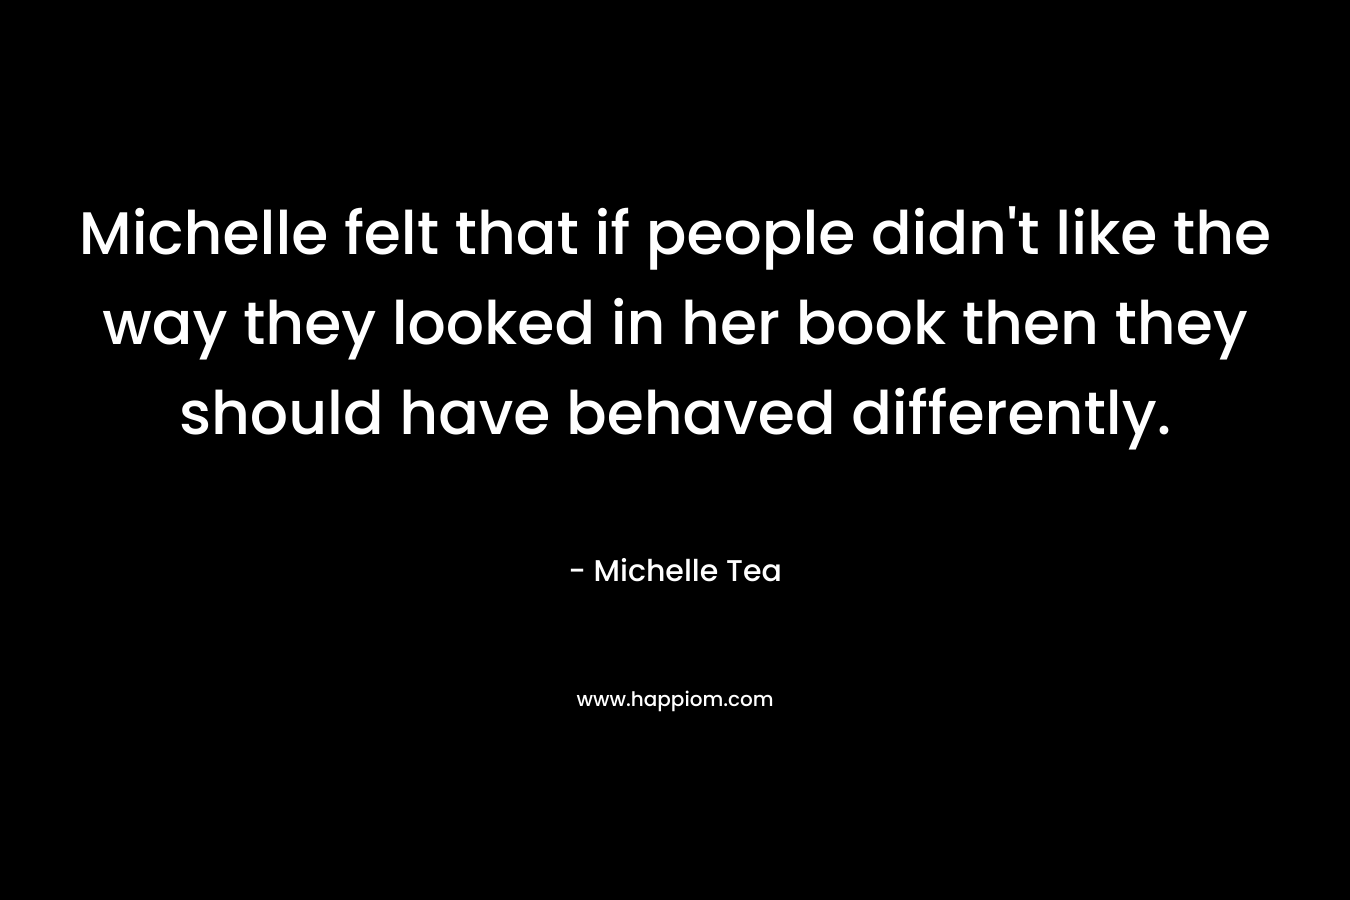 Michelle felt that if people didn’t like the way they looked in her book then they should have behaved differently. – Michelle Tea